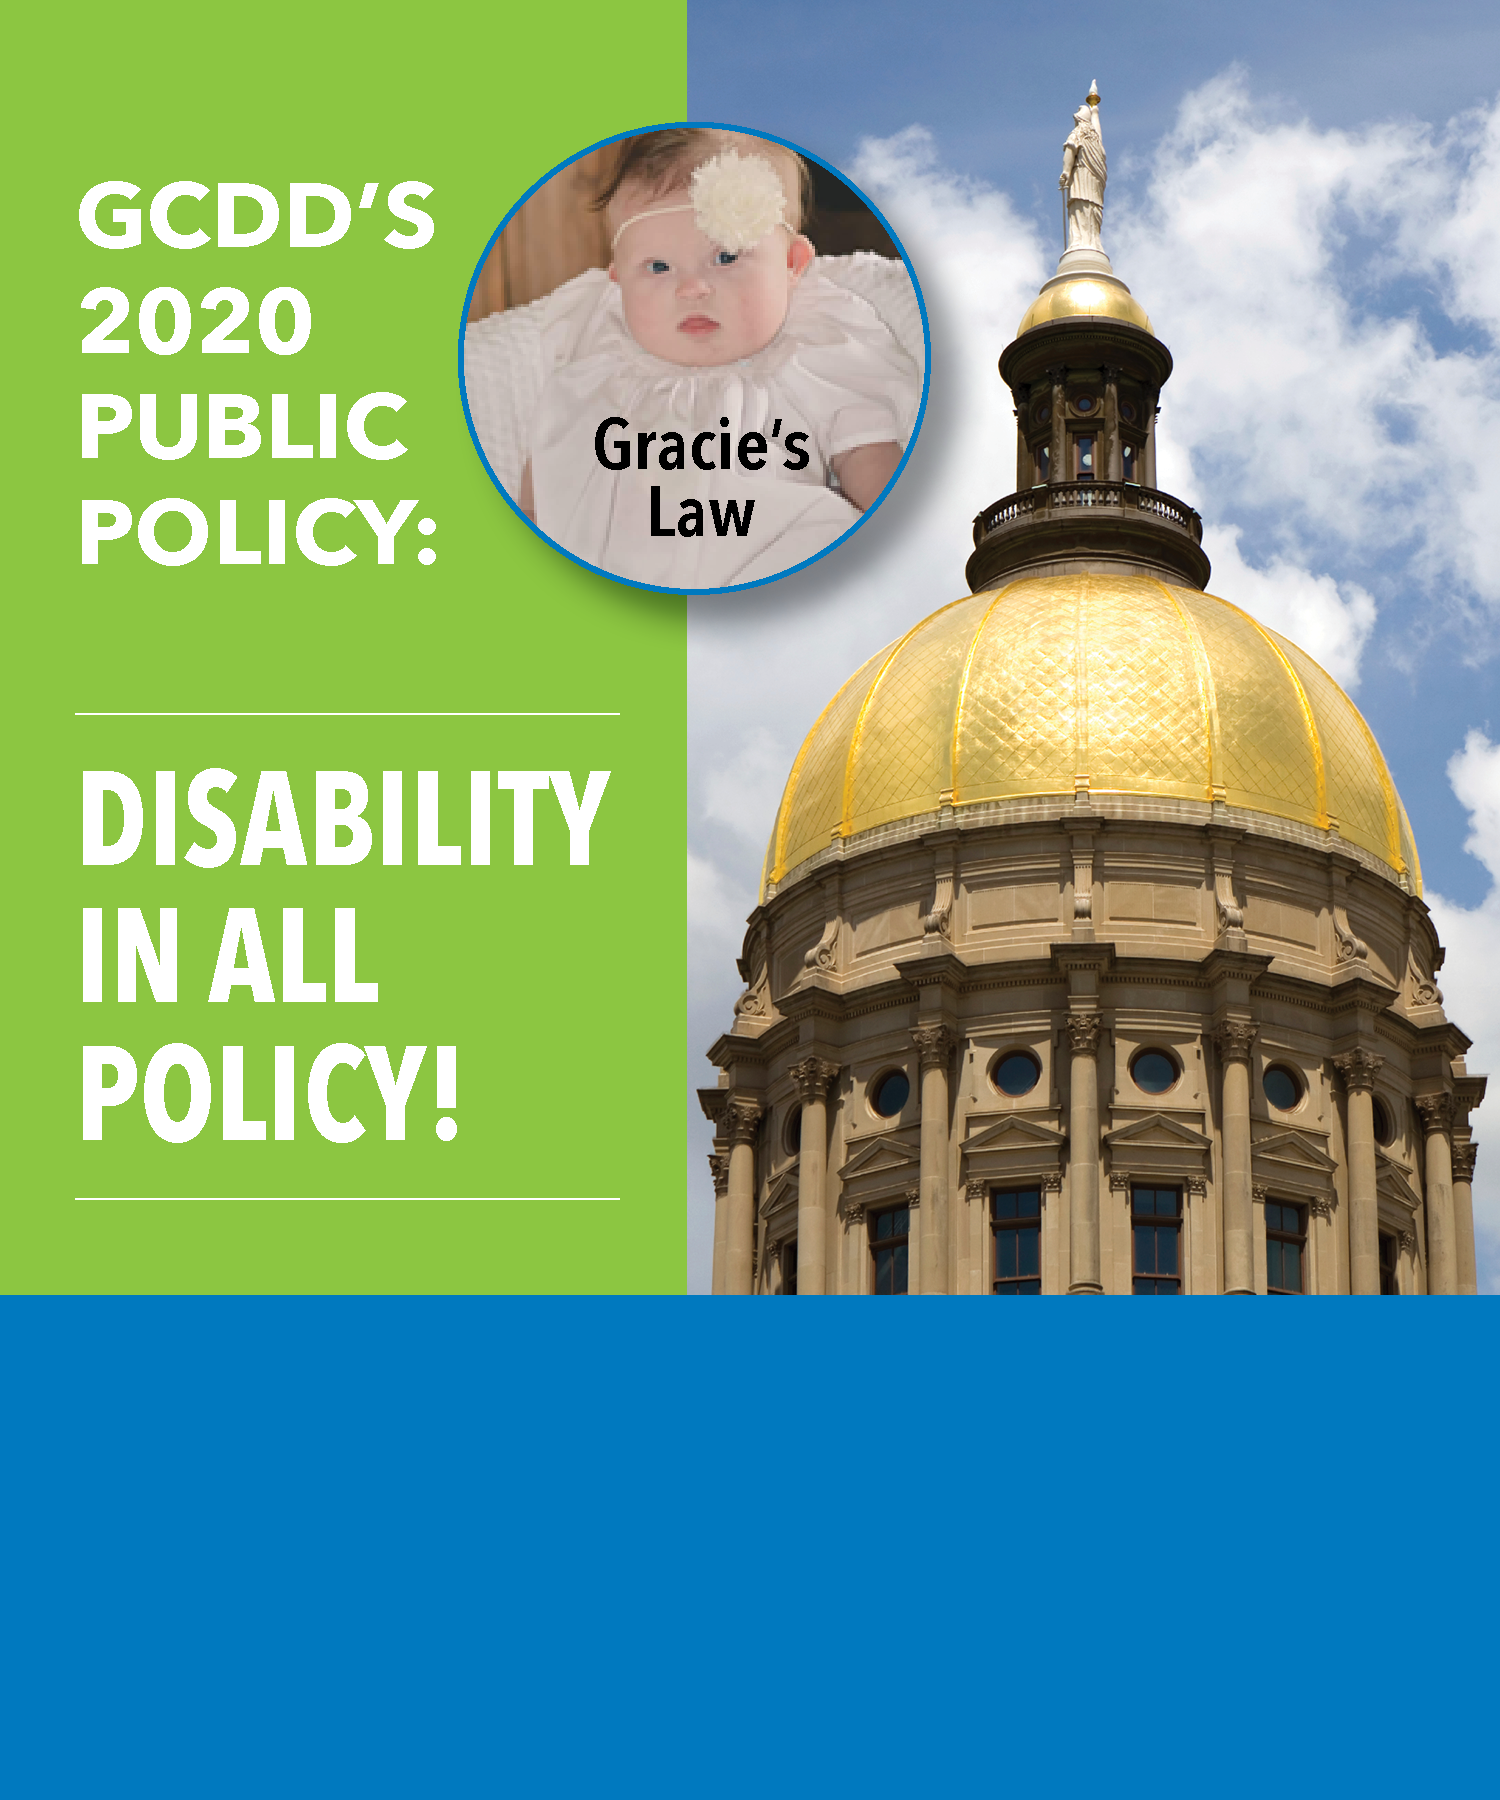 Georgia kicked off the 2020 legislative session with a new public policy team – Dr. Alyssa Lee and Charlie Miller. The council approved changes which allowed GCDD to engage with legislators to ensure people with developmental disabilities are considered in ALL policy, focusing on Gracie’s law, DD Waivers, competitive employment and more. Read more.